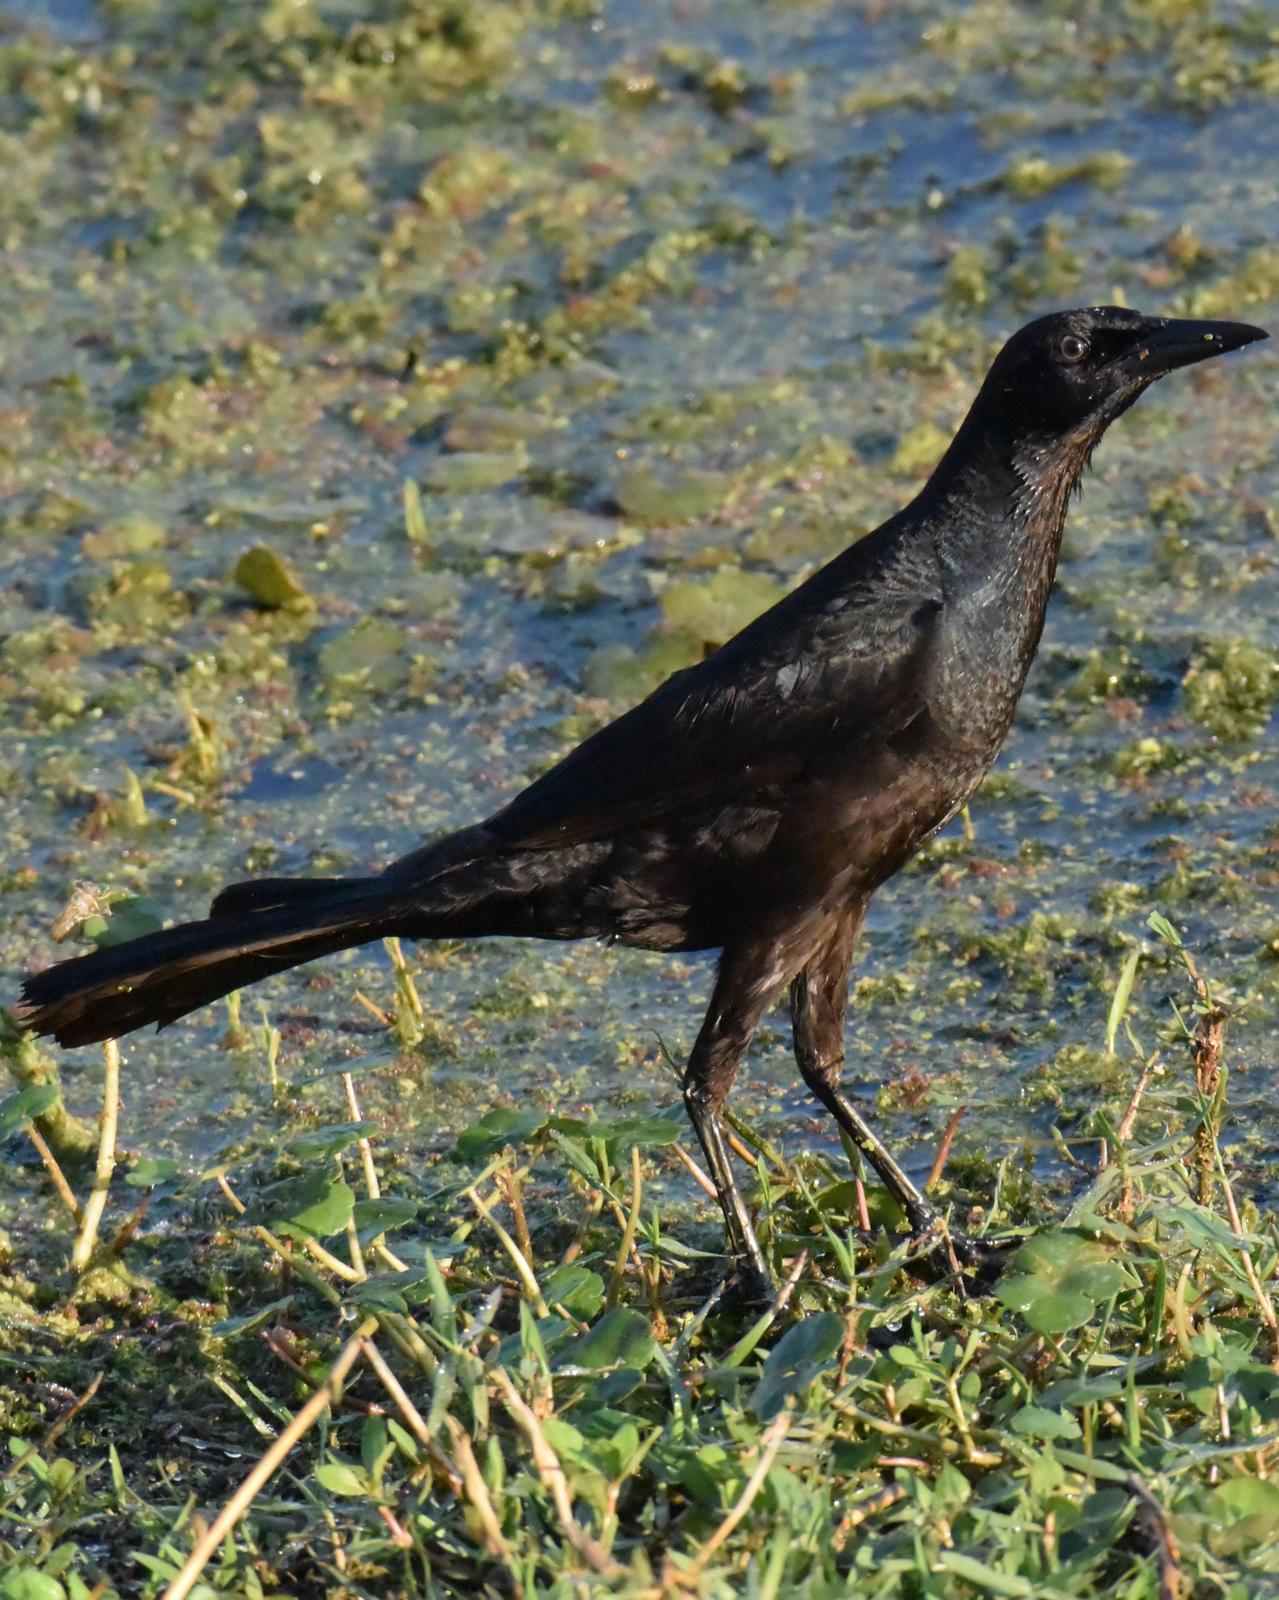 Boat-tailed Grackle Photo by Emily Percival